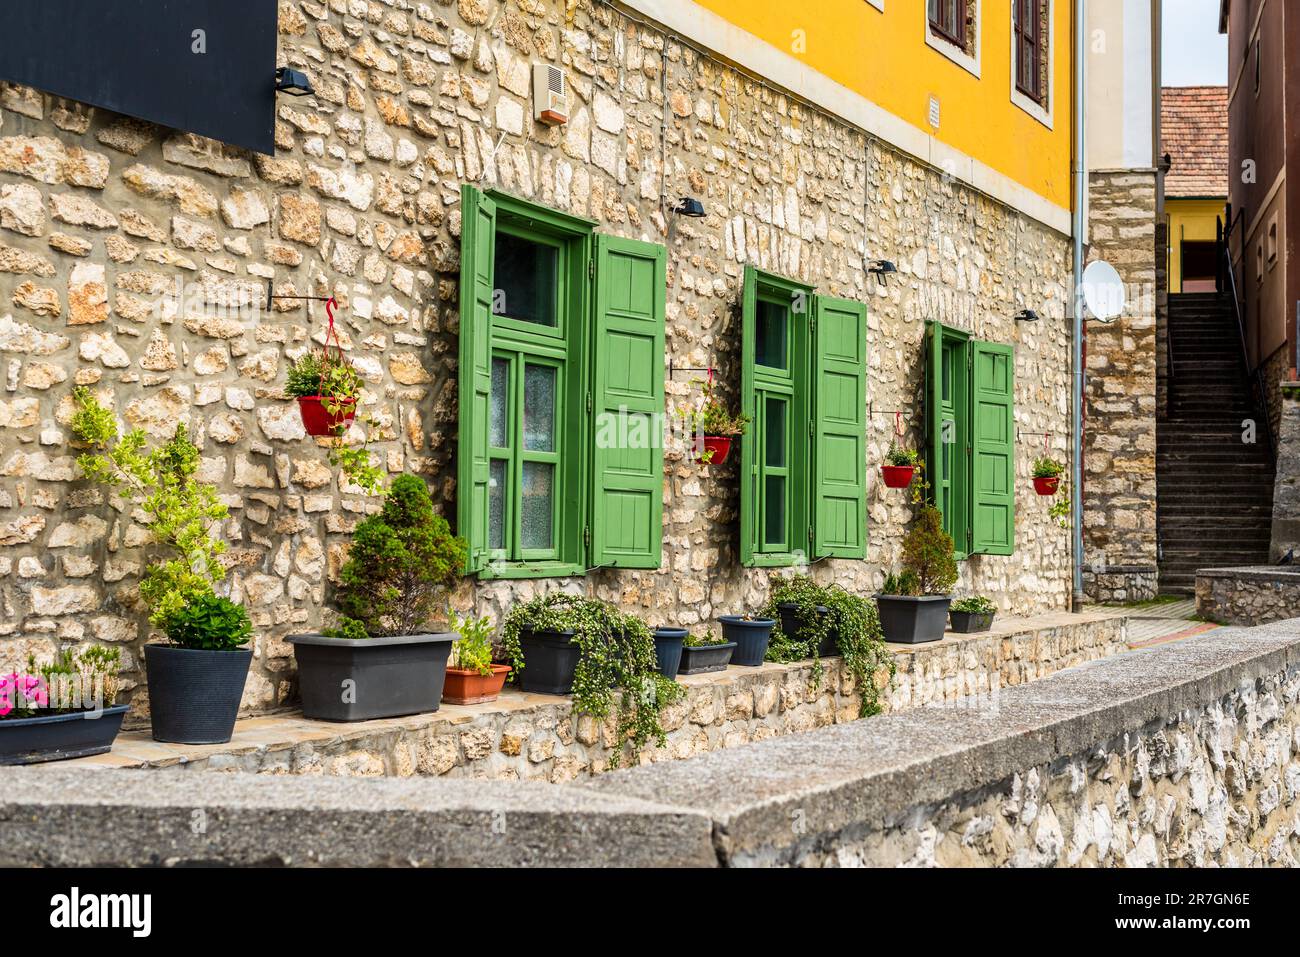 Beautiful green jalousie windows of renovated old building with stone walls. Stock Photo